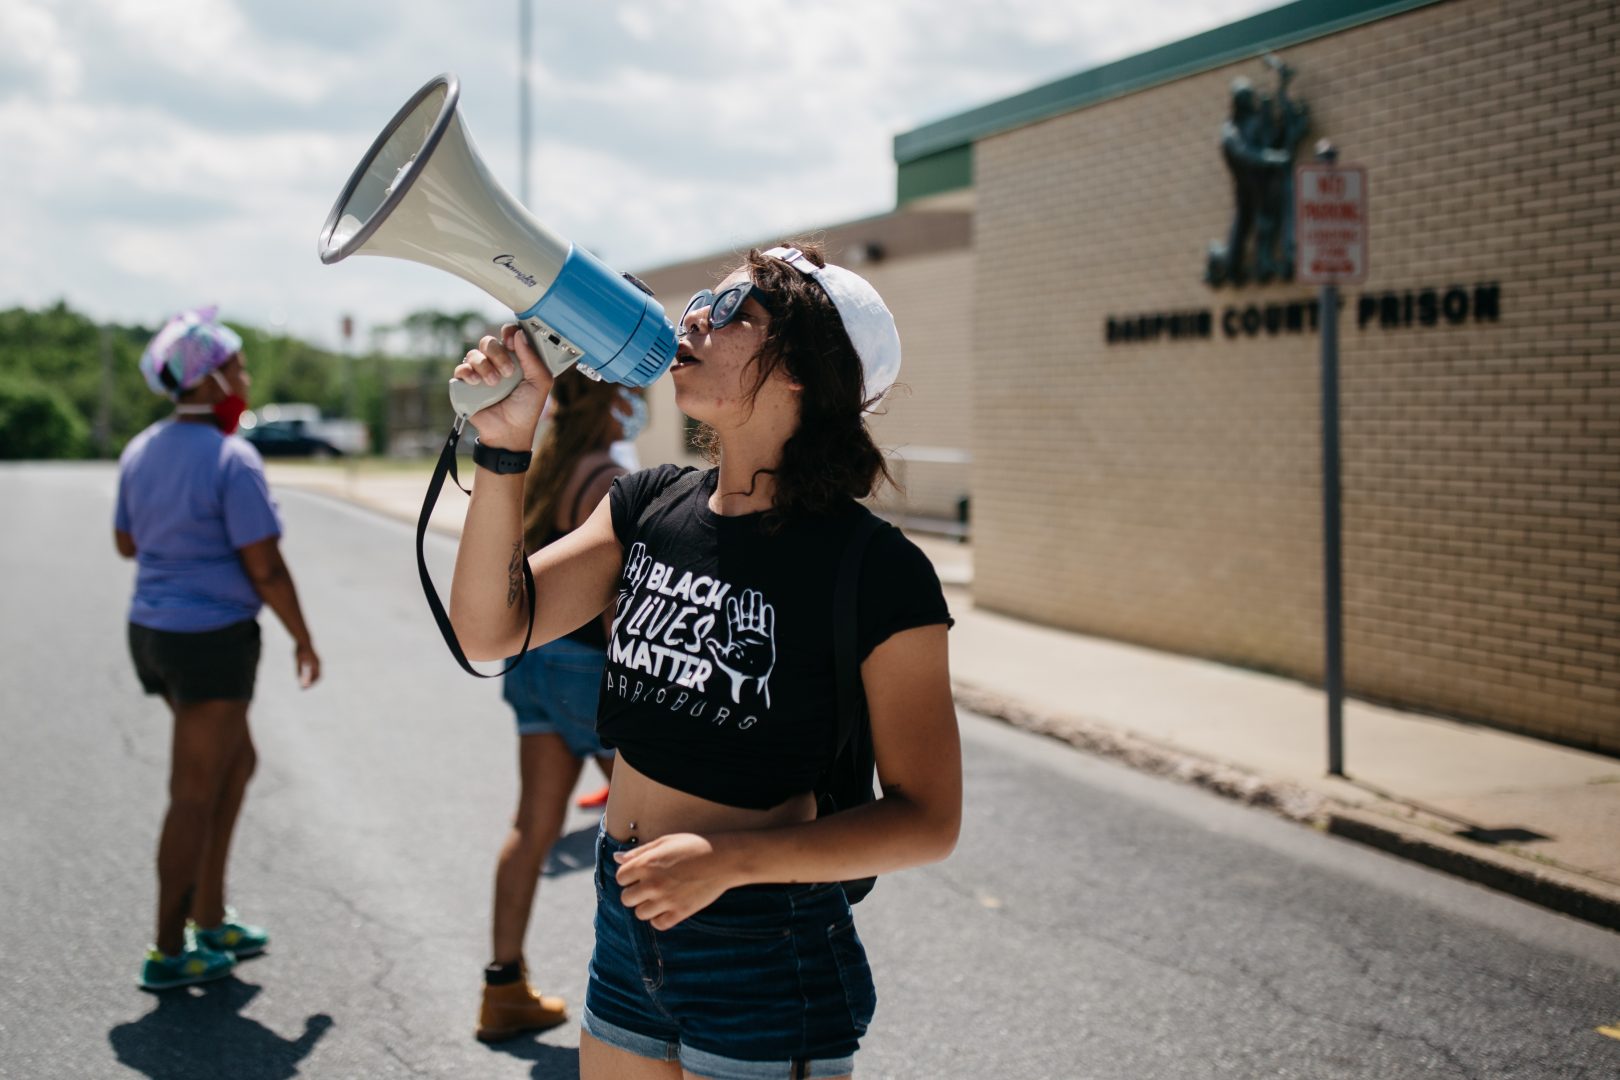 A protester with Black Lives Matter Harrisburg takes part in a protest outside Dauphin County Prison on June 30, 2020. Inmates inside the facility could be heard banging on the windows and holding up signs pleading for help. (Kate Landis, PA Post)